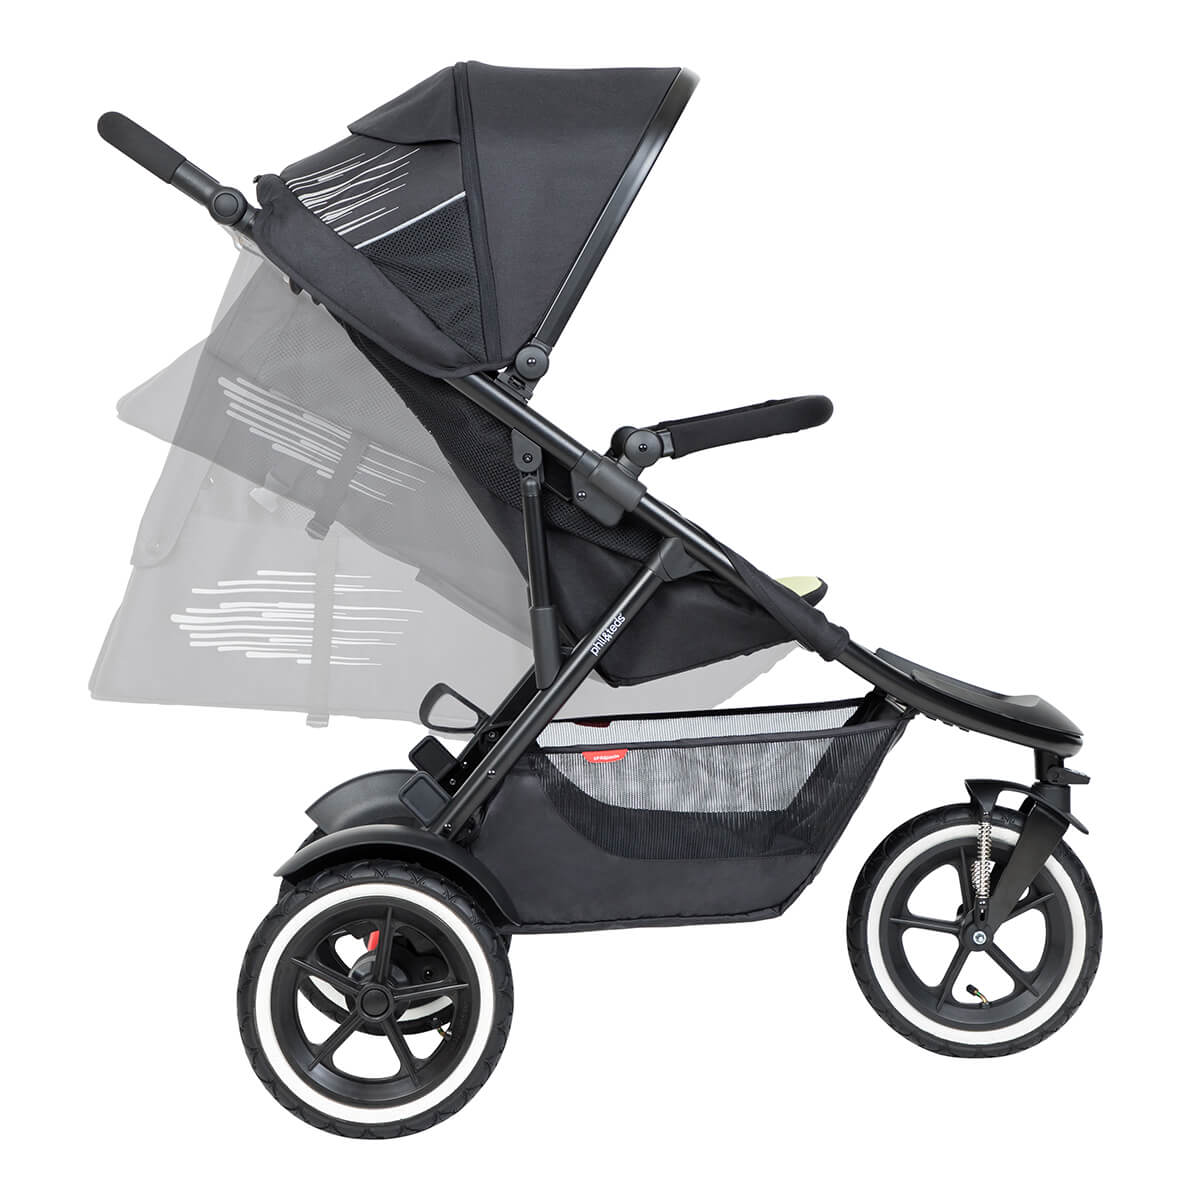 https://cdn.accentuate.io/4343443488802/19437753335986/philteds-sport-buggy-can-recline-in-multiple-angles-including-full-recline-for-newborn-baby-v1626482671275.jpg?1200x1200